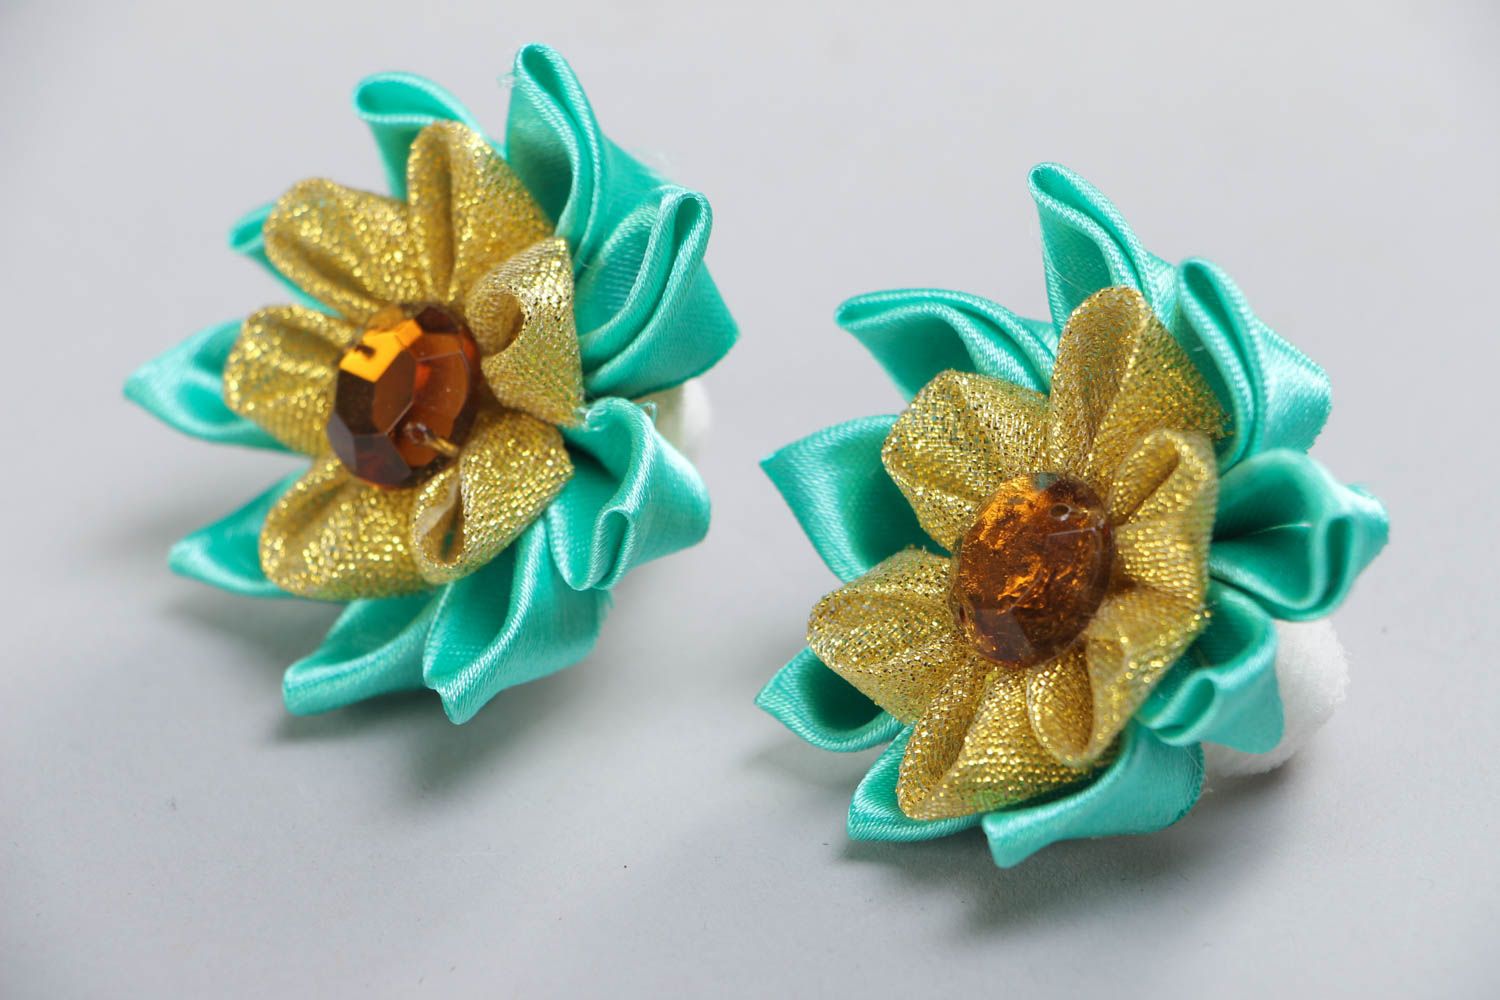 Handmade decorative hair ties with colorful kanzashi flowers set of 2 items photo 2